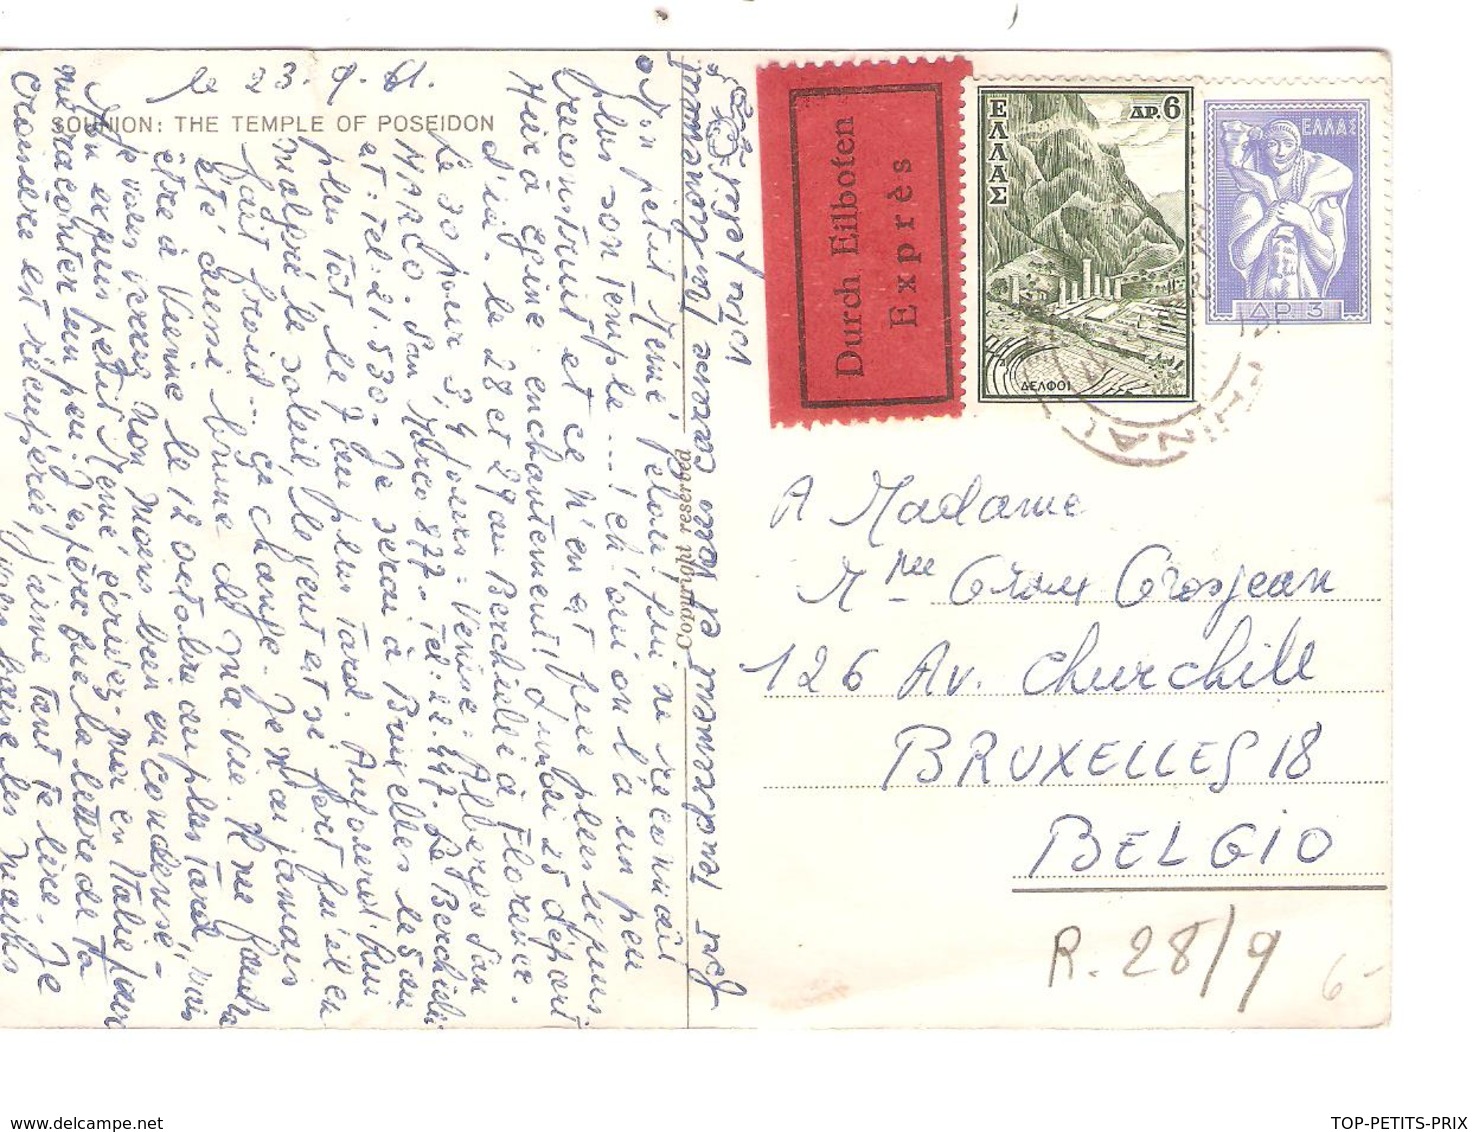 REF1204/ Greece Express PC (The Temple Of Poseidon) 1961 > Belgium Brussels Arrival Cancellation 26/9/61 Brussels - Postmarks - EMA (Printer Machine)